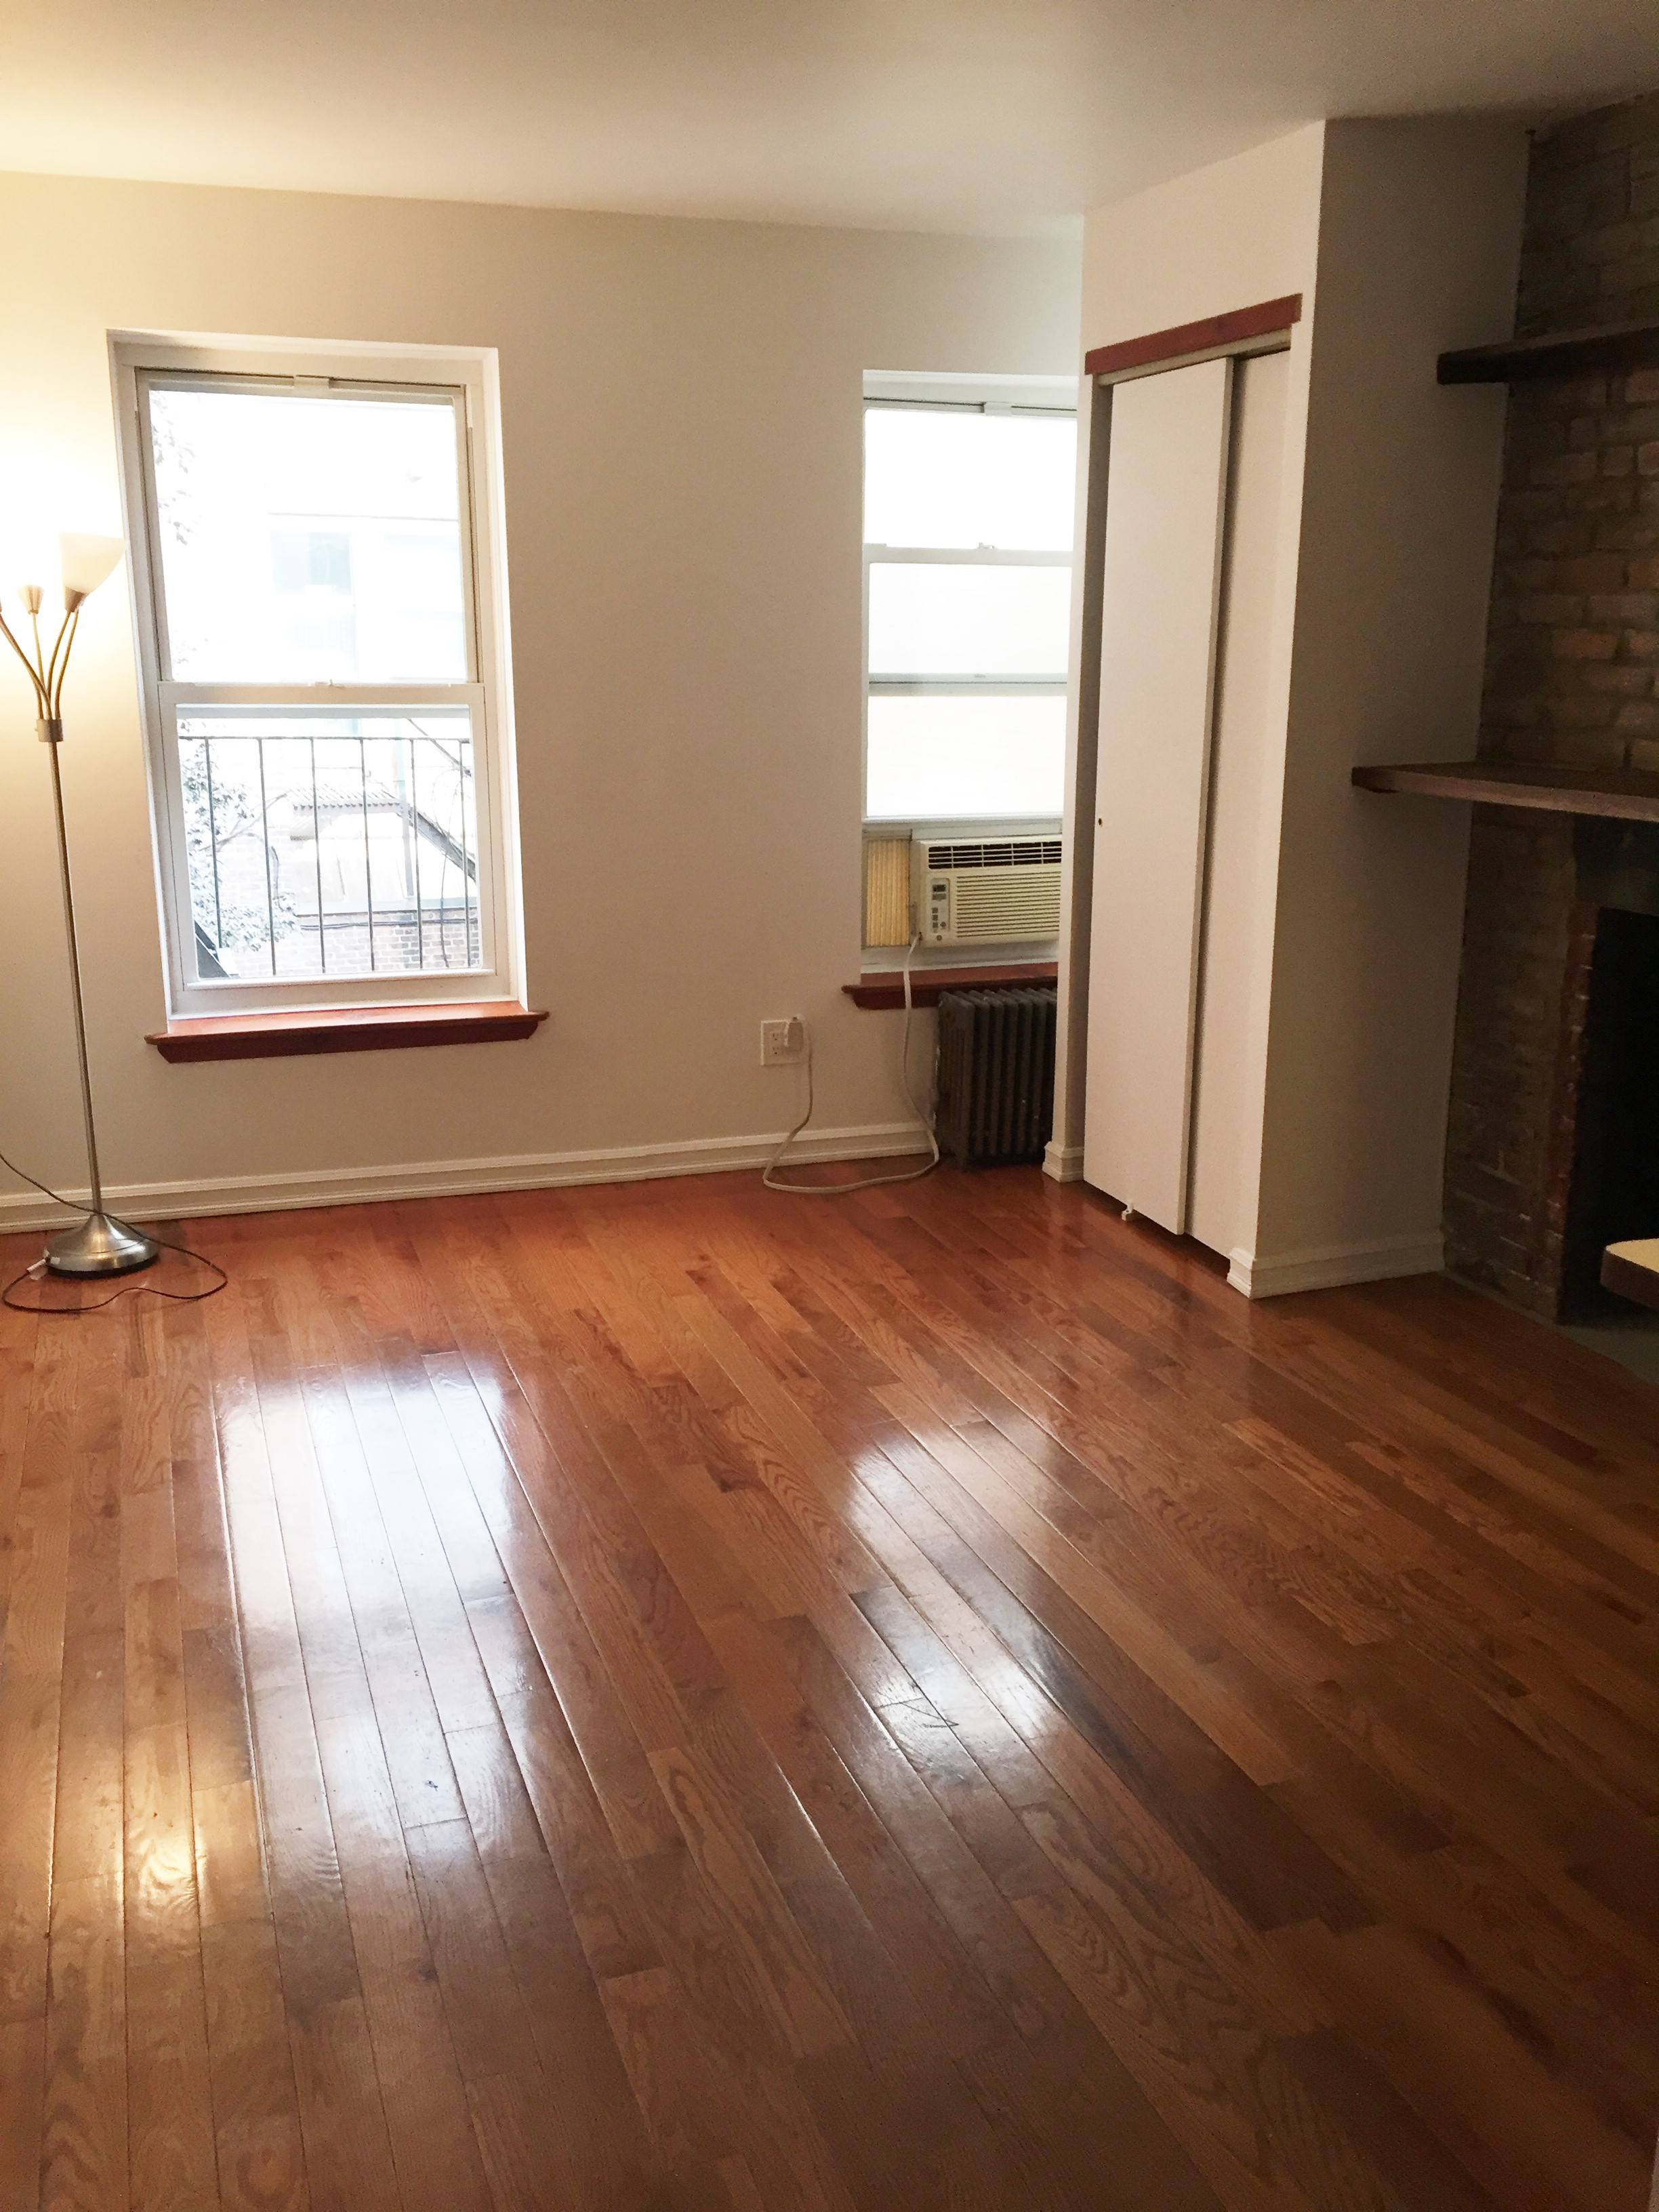 Just Reduced and Unbeatable Priced Studio w/ Breakfast Bar and 2 Closets 